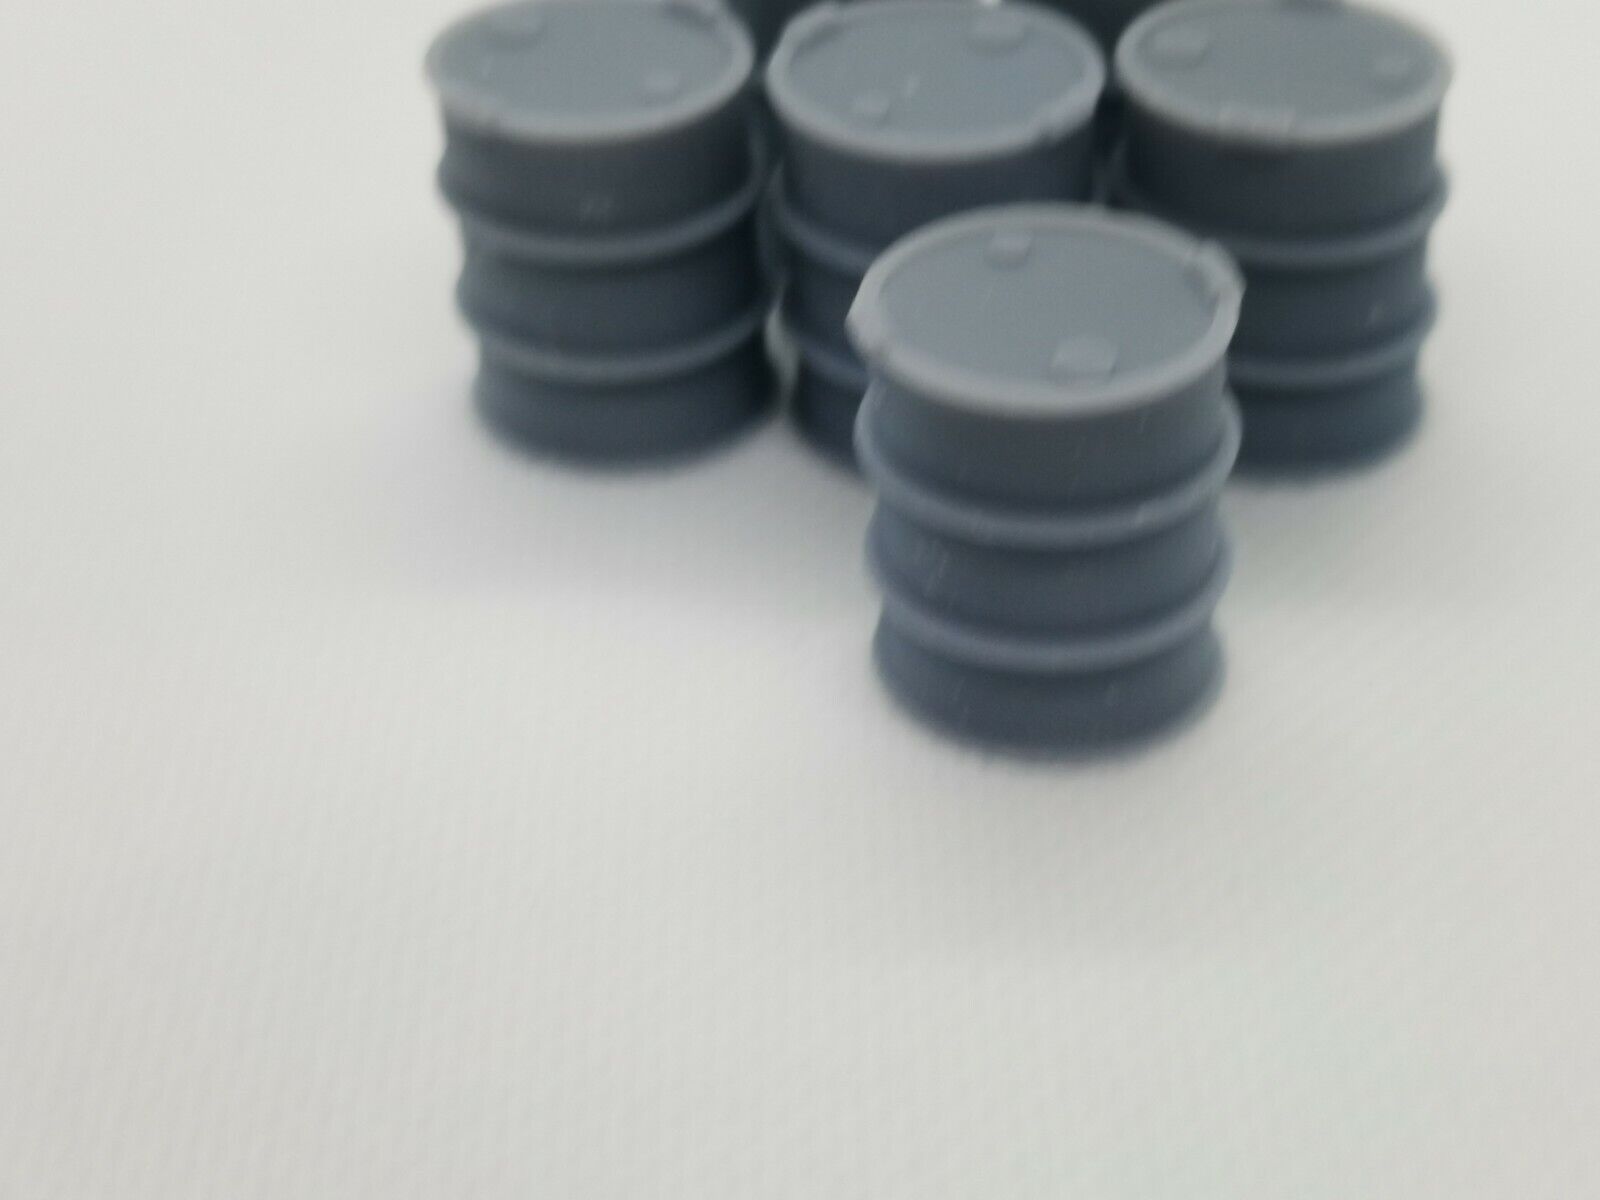 6 x Oil Drums for 28mm compatible with WH/ Terrain etc.